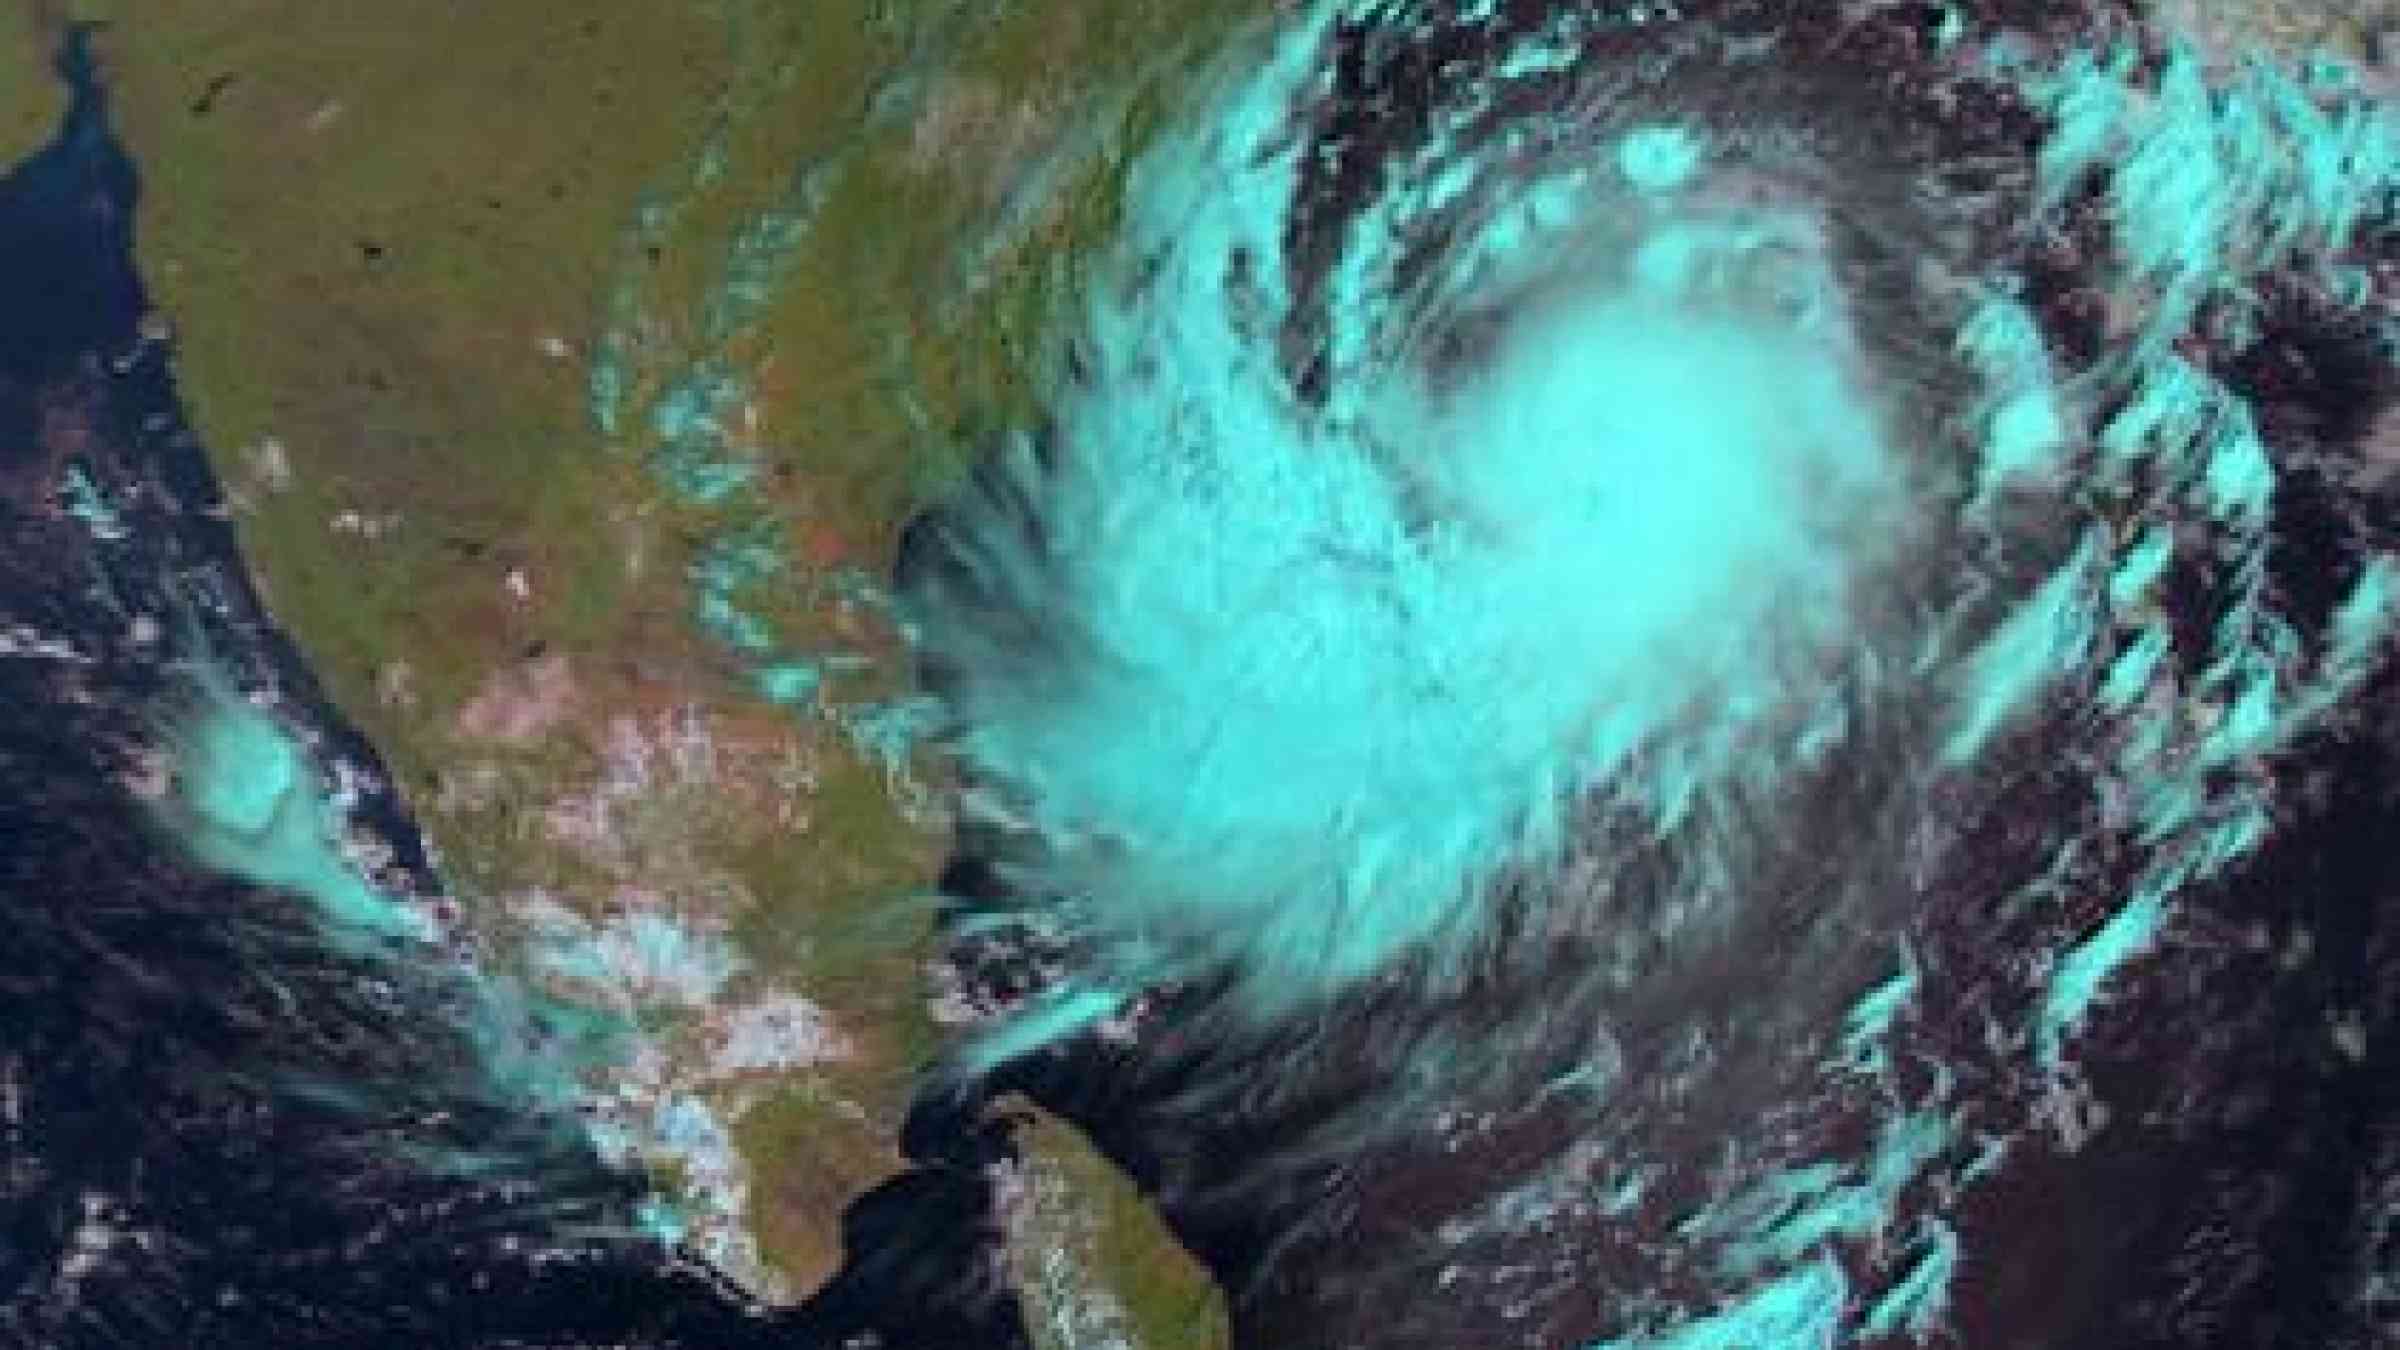 Cyclone Hudhud generated winds of up to 200kmh and storm surges of two metres as it pounded coastal districts of Andhra Pradesh and Odisha. (Photo: EUMETSAT)